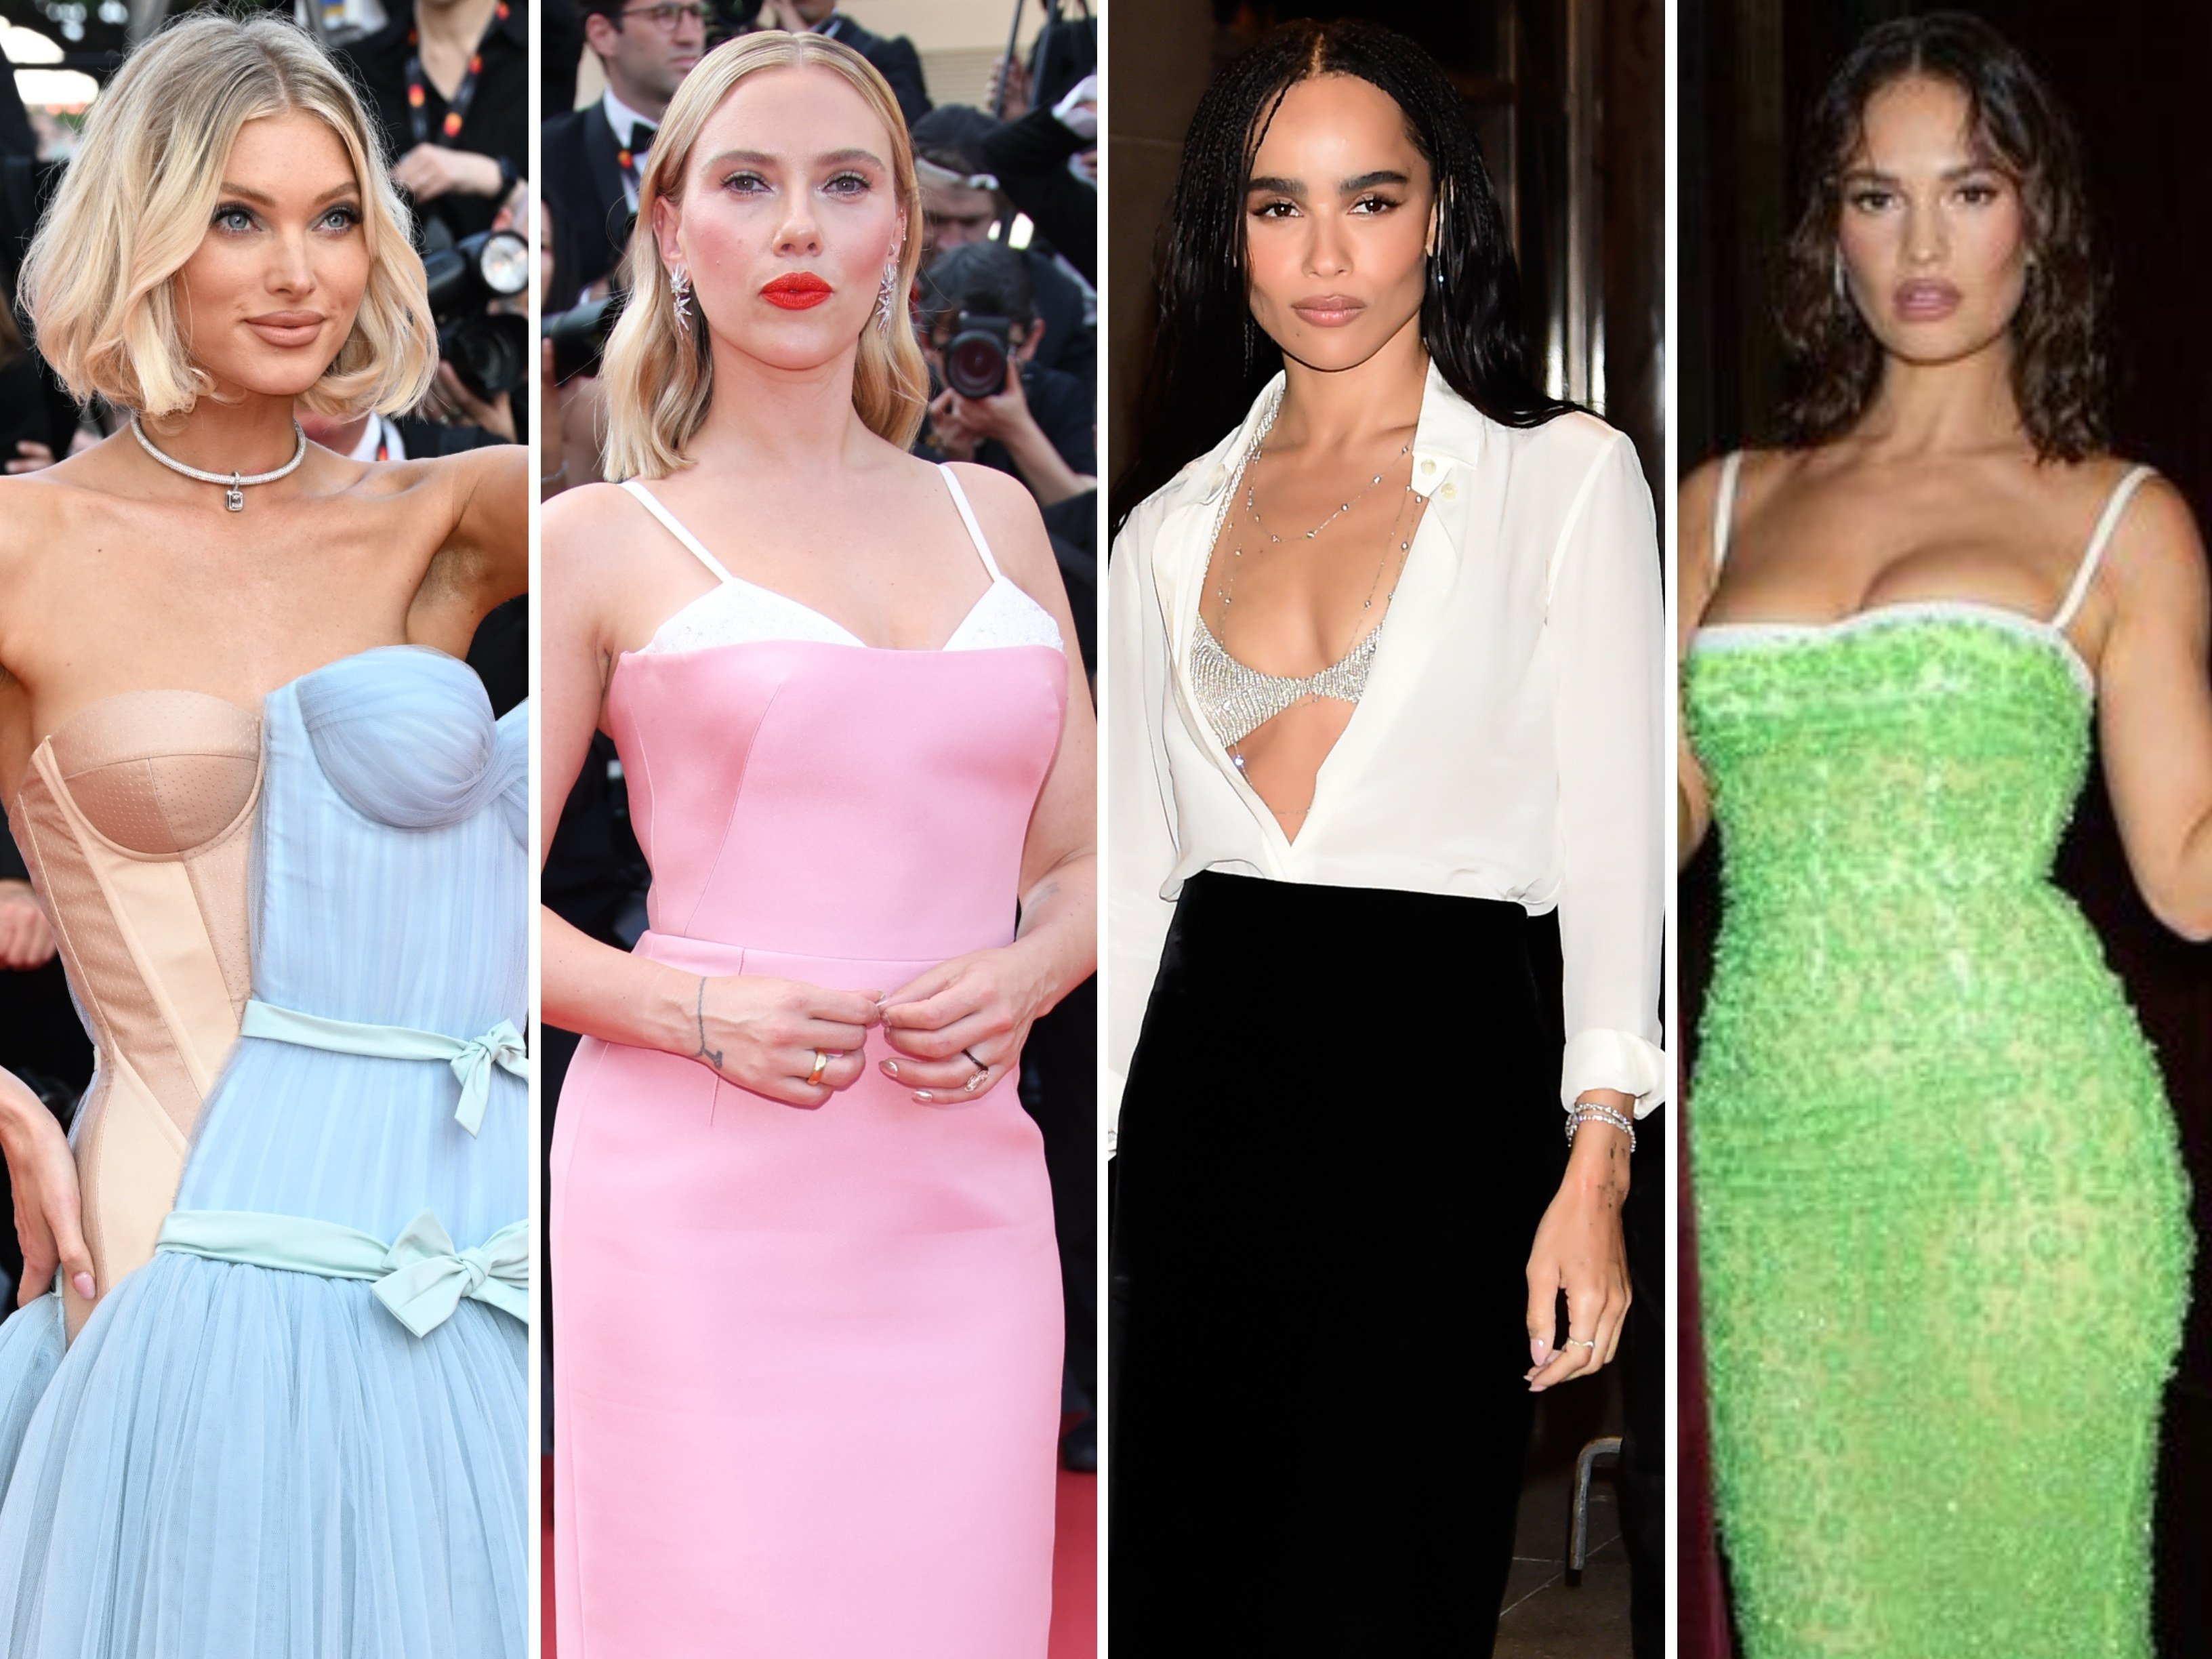 Elsa Hosk, Scarlett Johansson, Zoë Kravitz and Lily James are all embracing the exposed bra trend. Photos: Getty Images, DPA, @lilyjamesofficial/Instagram